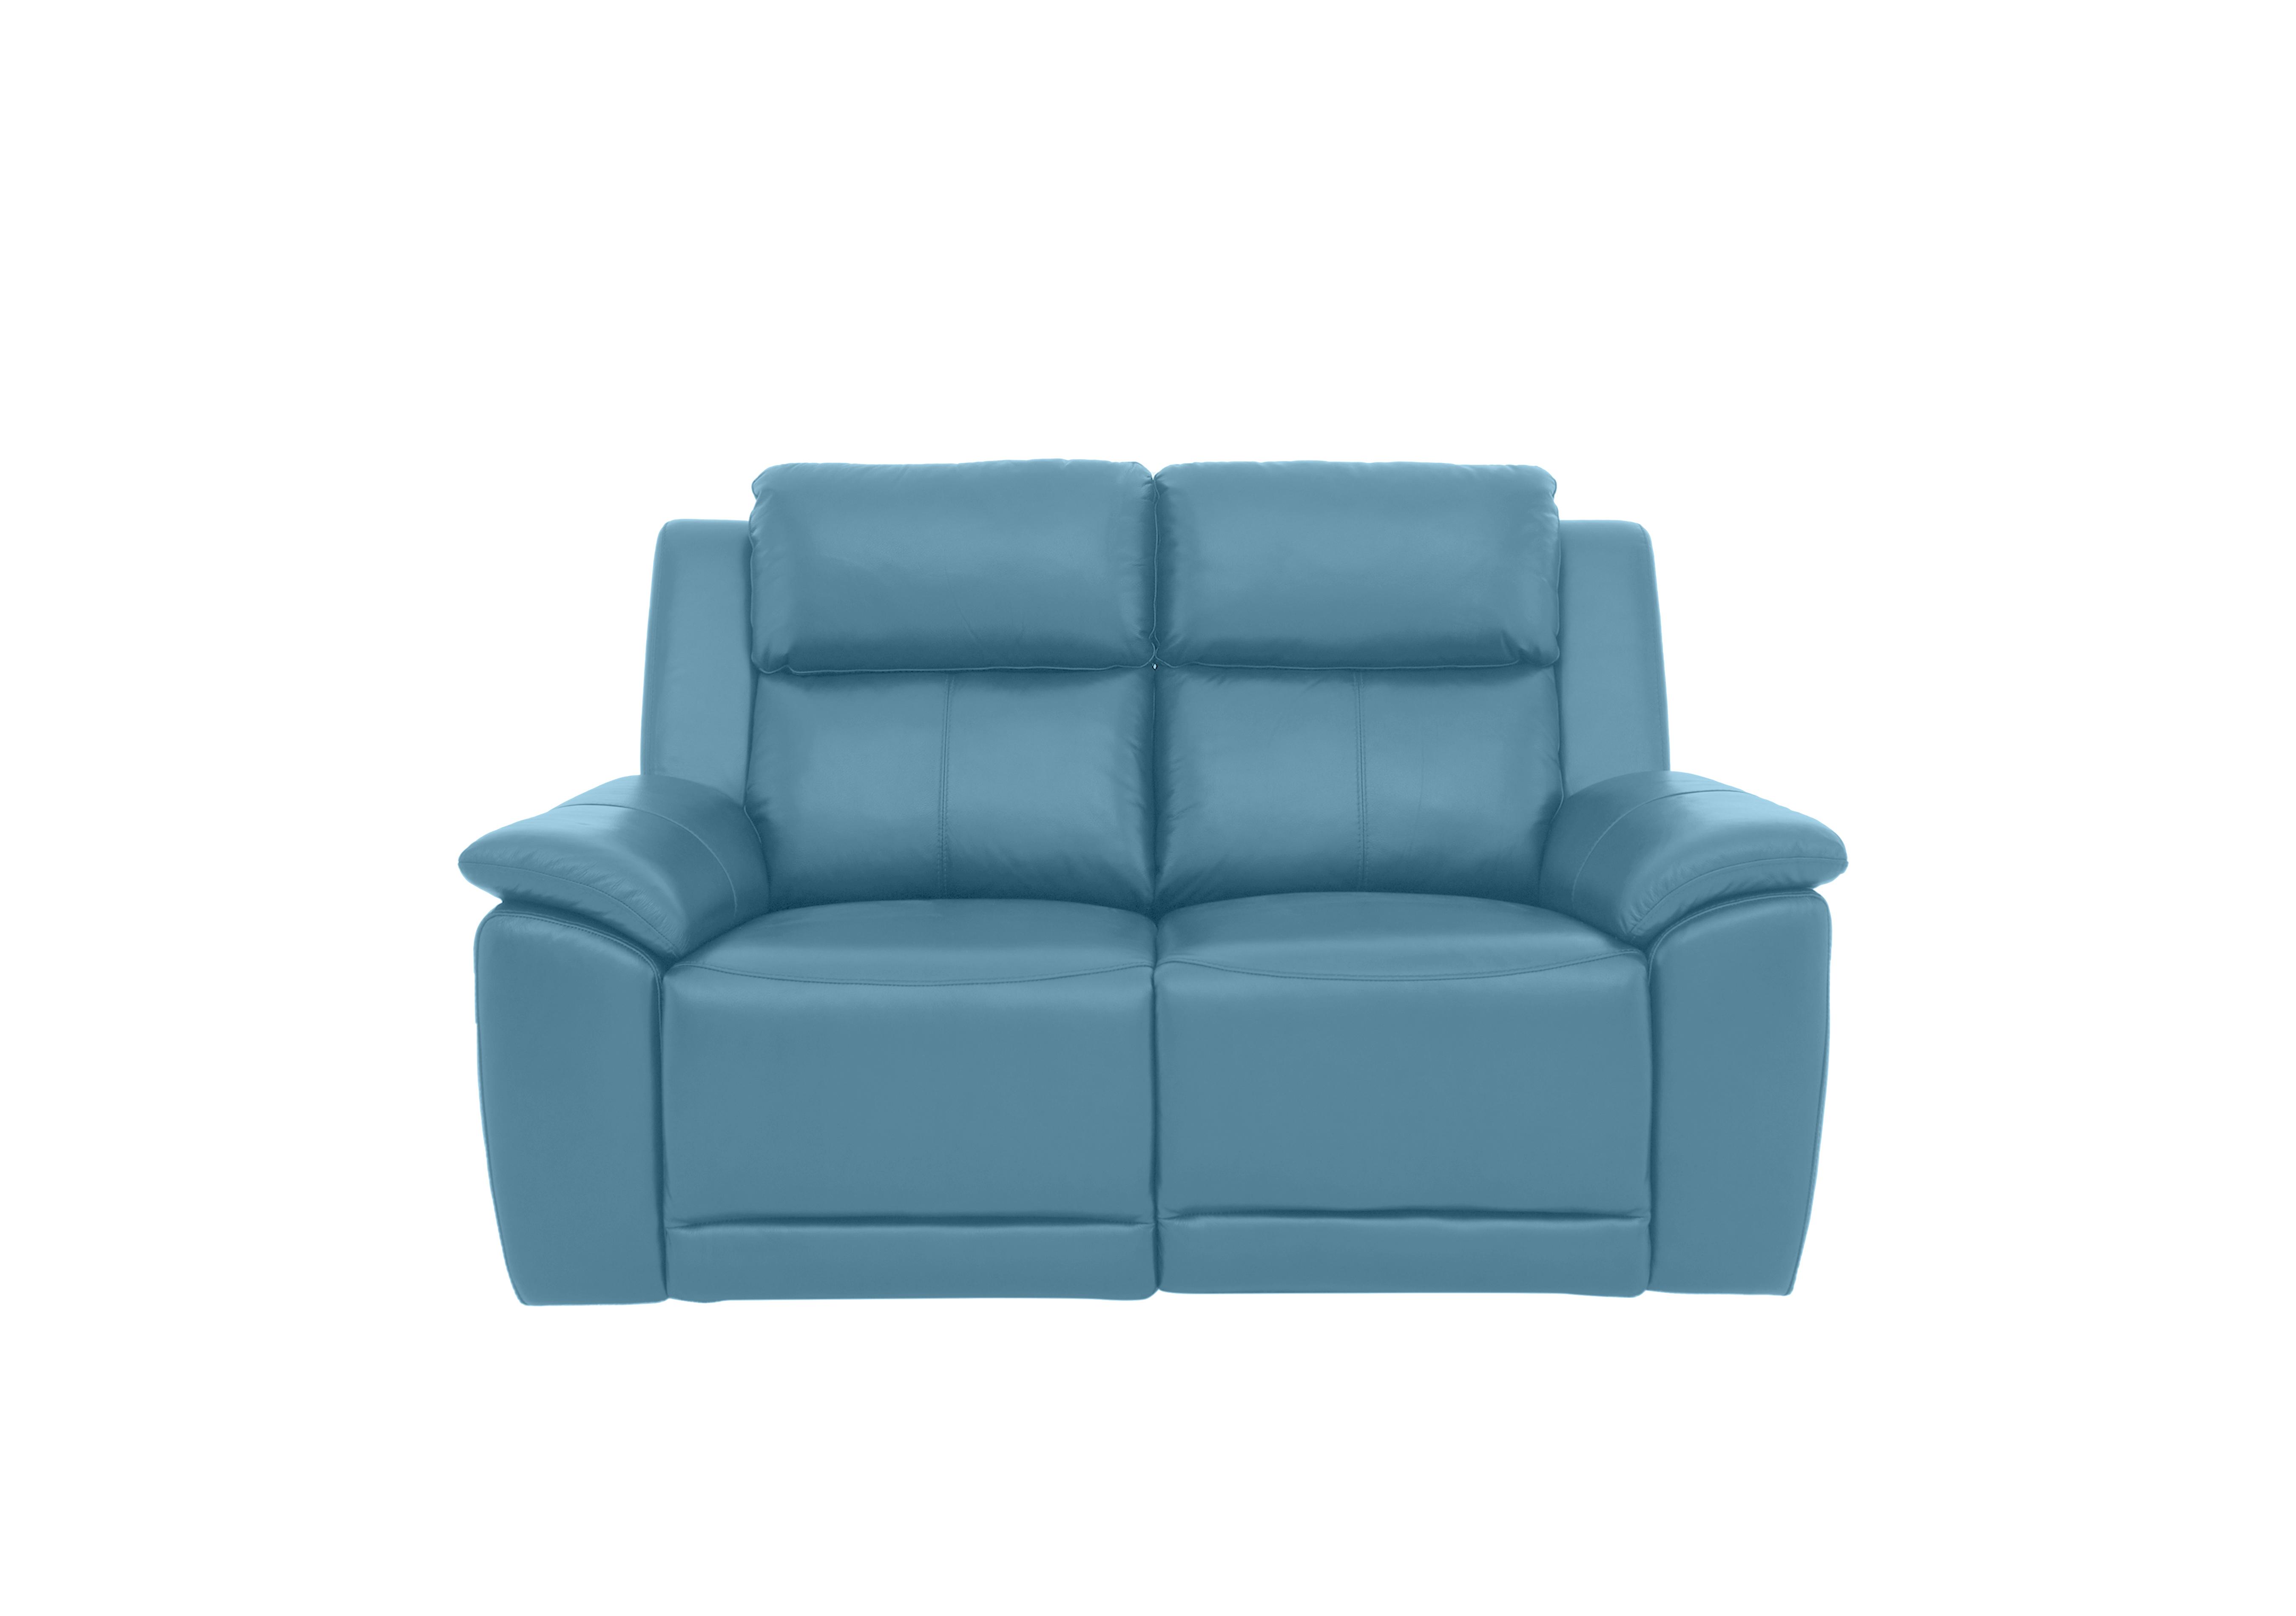 Utah 2 Seater Leather Power Recliner Sofa with Power Headrests and Power Lumbar in Blu Le-9312 on Furniture Village